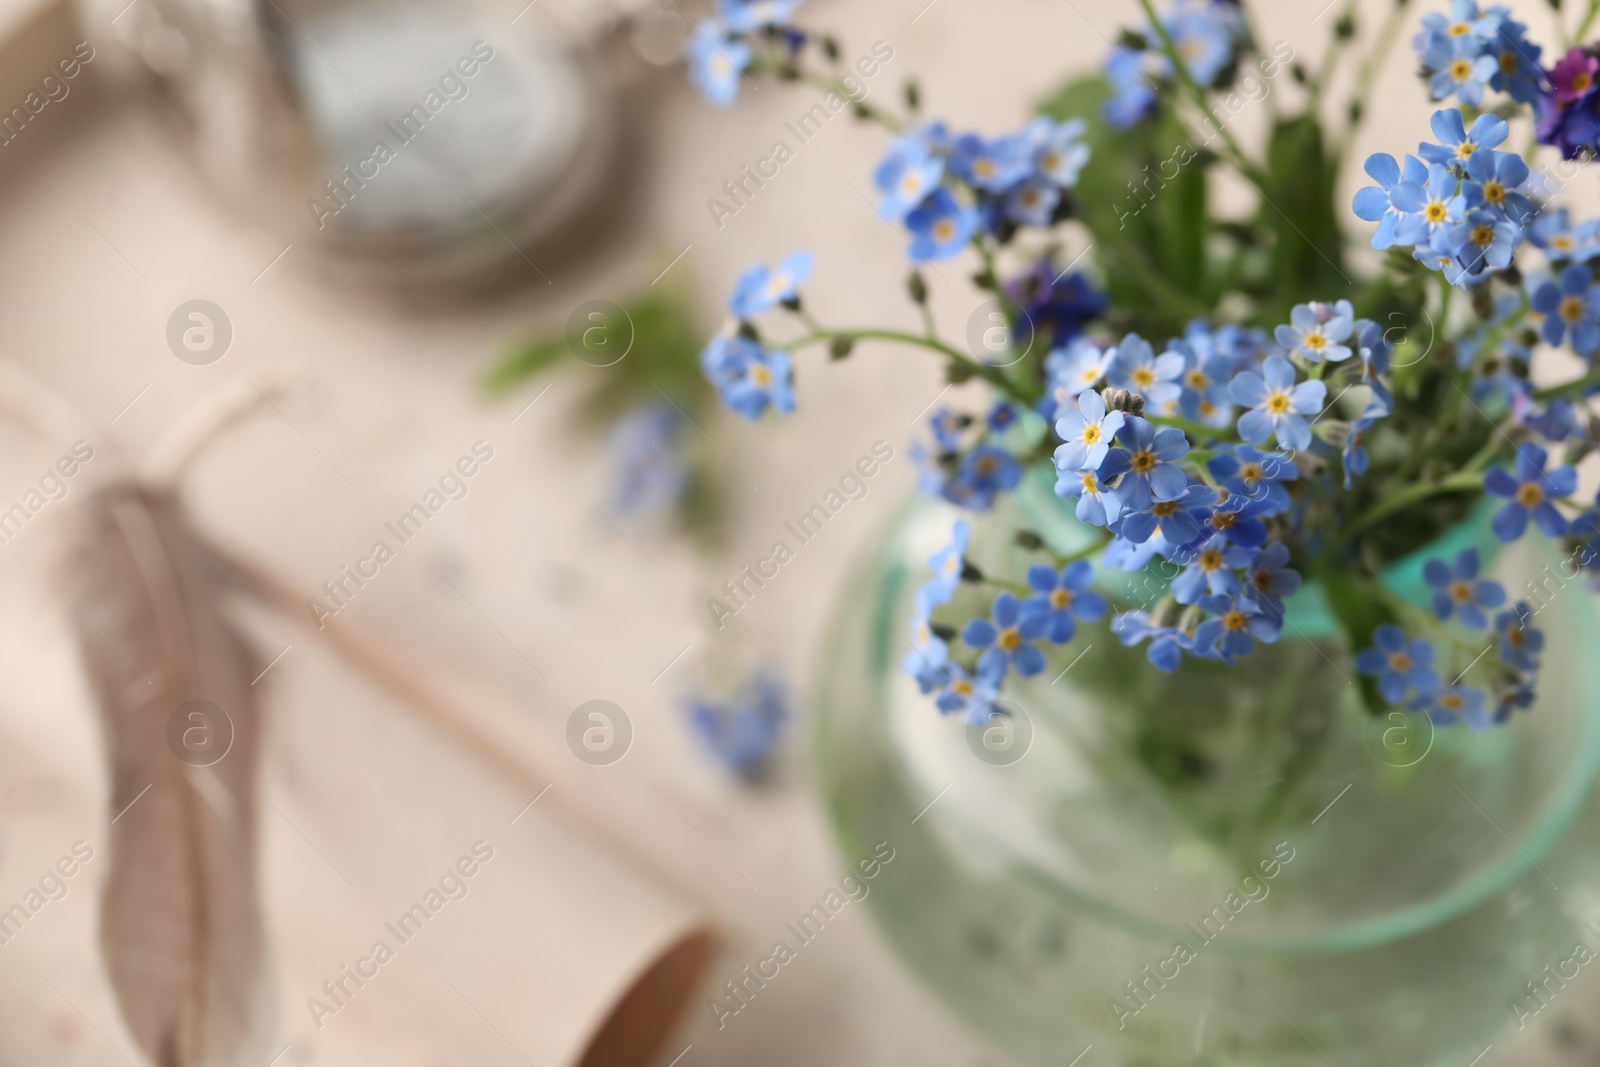 Photo of Beautiful Forget-me-not flowers in vase, closeup view